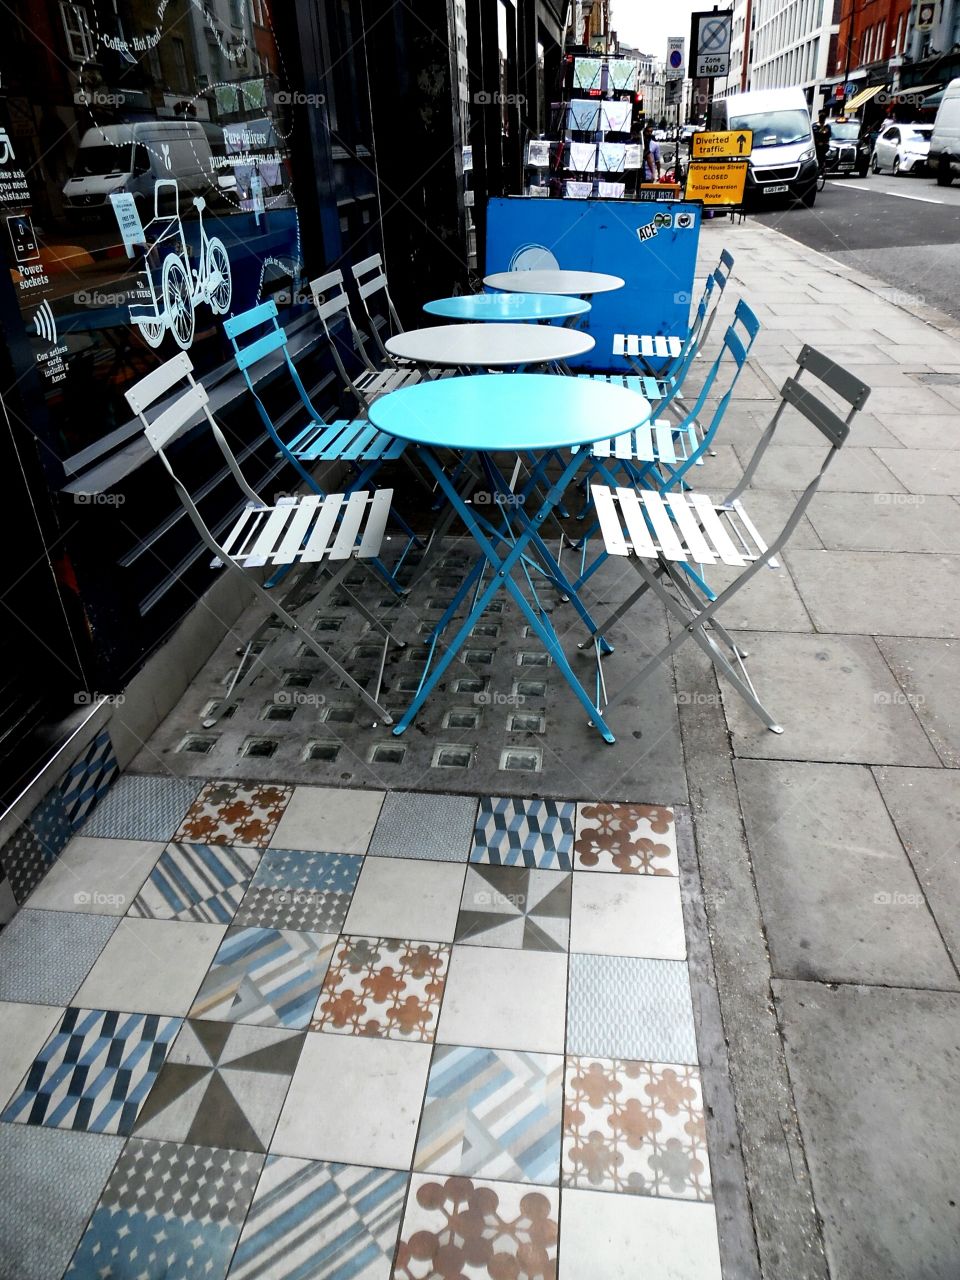 decorative tiles on the street outside a cafe